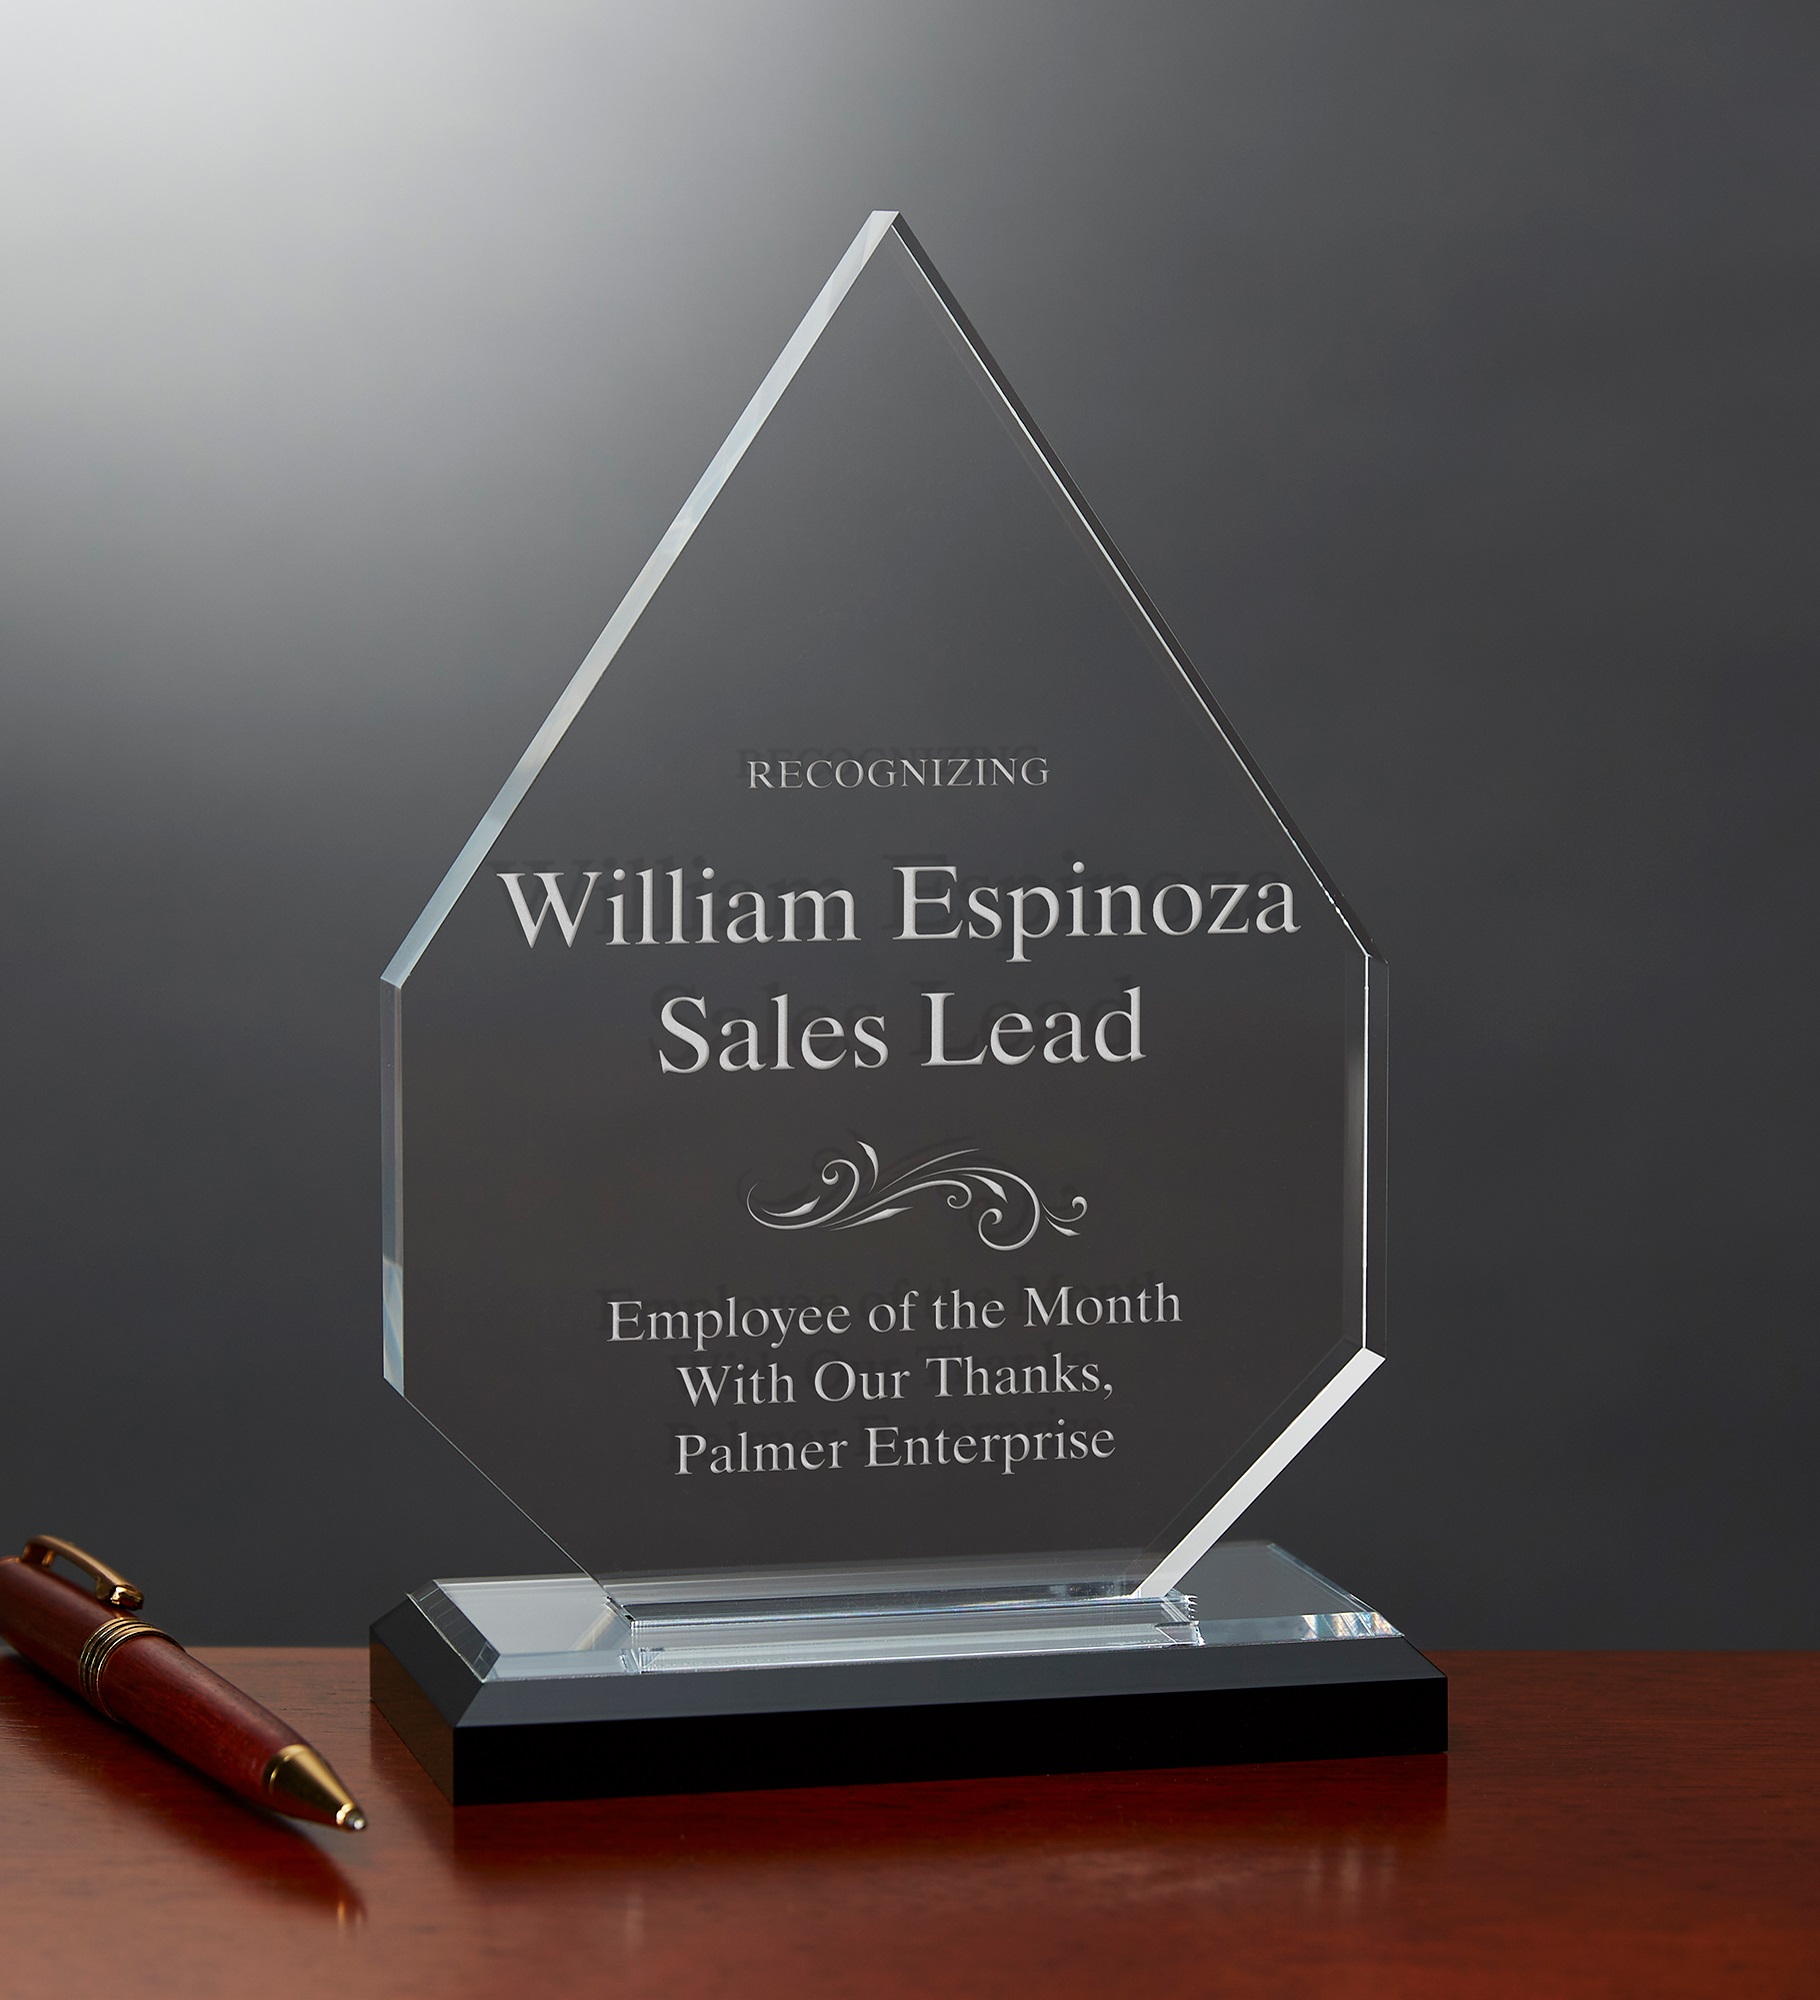 Reflections of Excellence Personalized Diamond Award